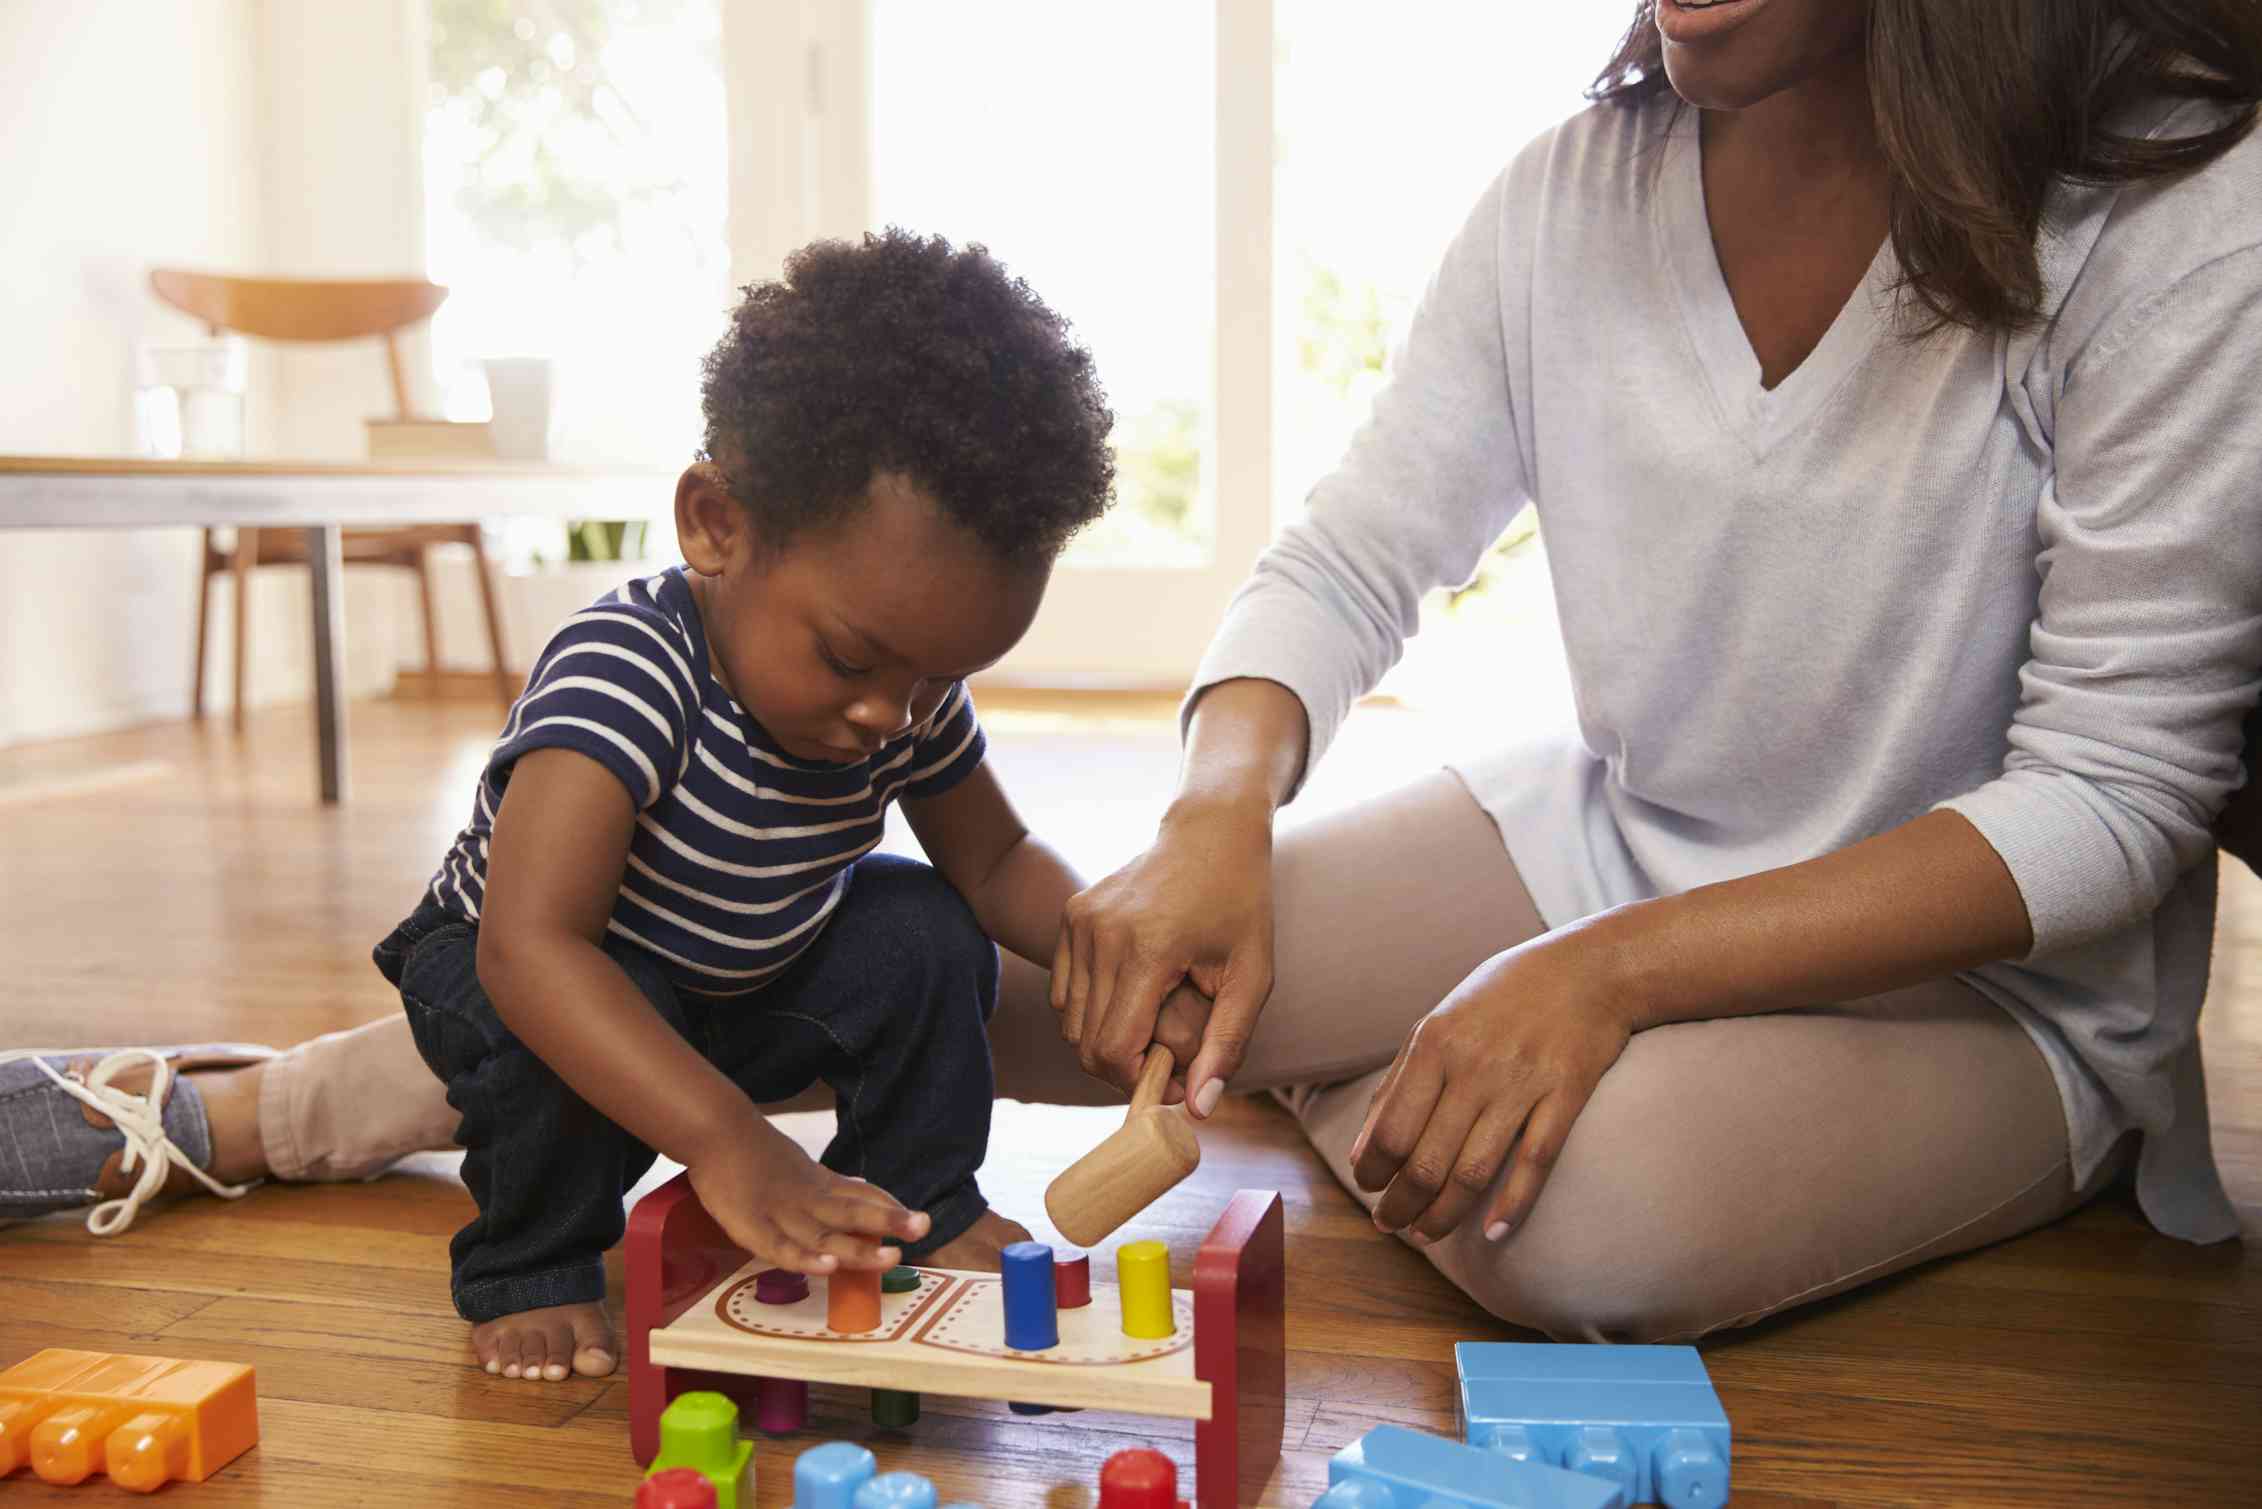 A toddler seen playing with blocks.